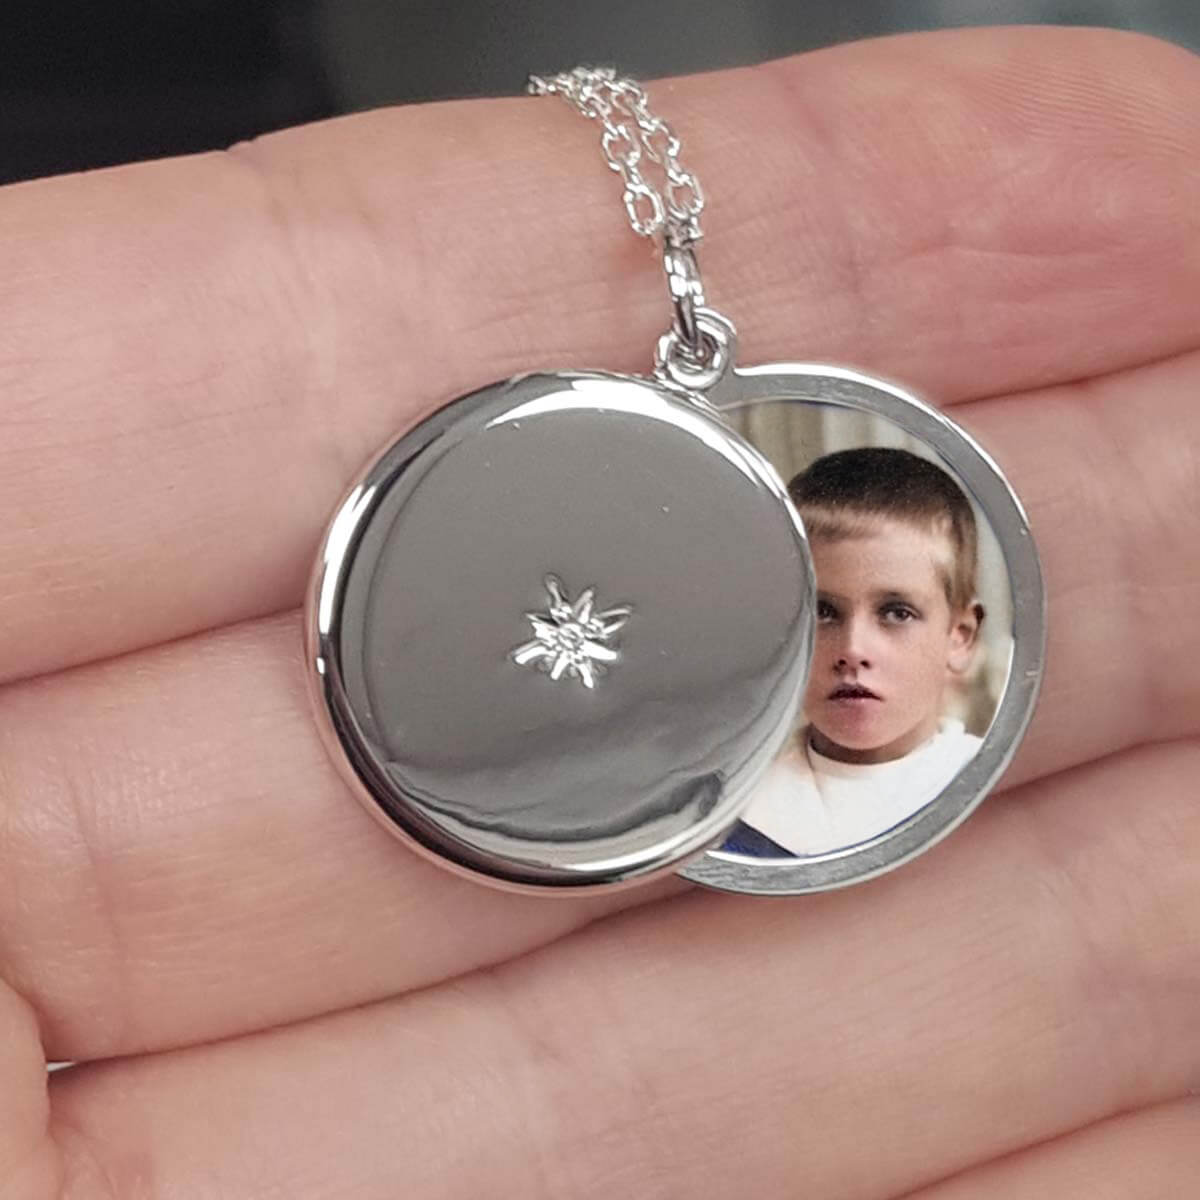 round photo locket in a hand containing a photo of a young boy